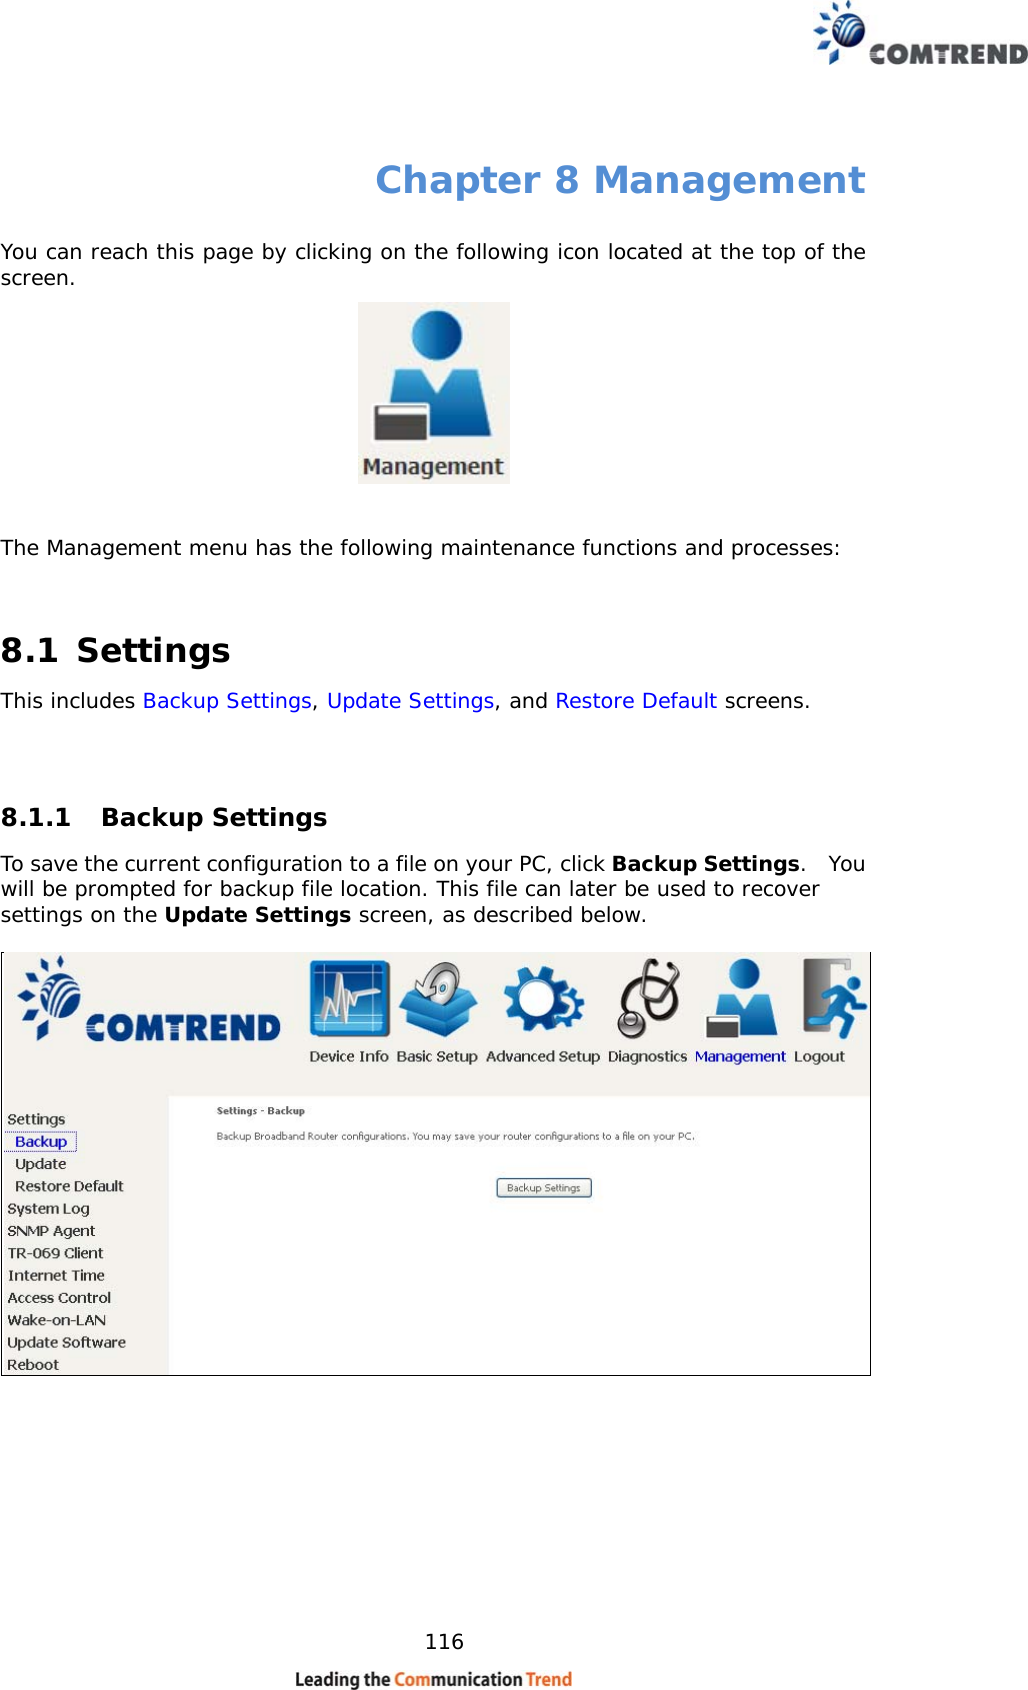    116 Chapter 8 Management You can reach this page by clicking on the following icon located at the top of the screen.    The Management menu has the following maintenance functions and processes:   8.1 Settings This includes Backup Settings, Update Settings, and Restore Default screens.   8.1.1 Backup Settings  To save the current configuration to a file on your PC, click Backup Settings.  You will be prompted for backup file location. This file can later be used to recover settings on the Update Settings screen, as described below.    